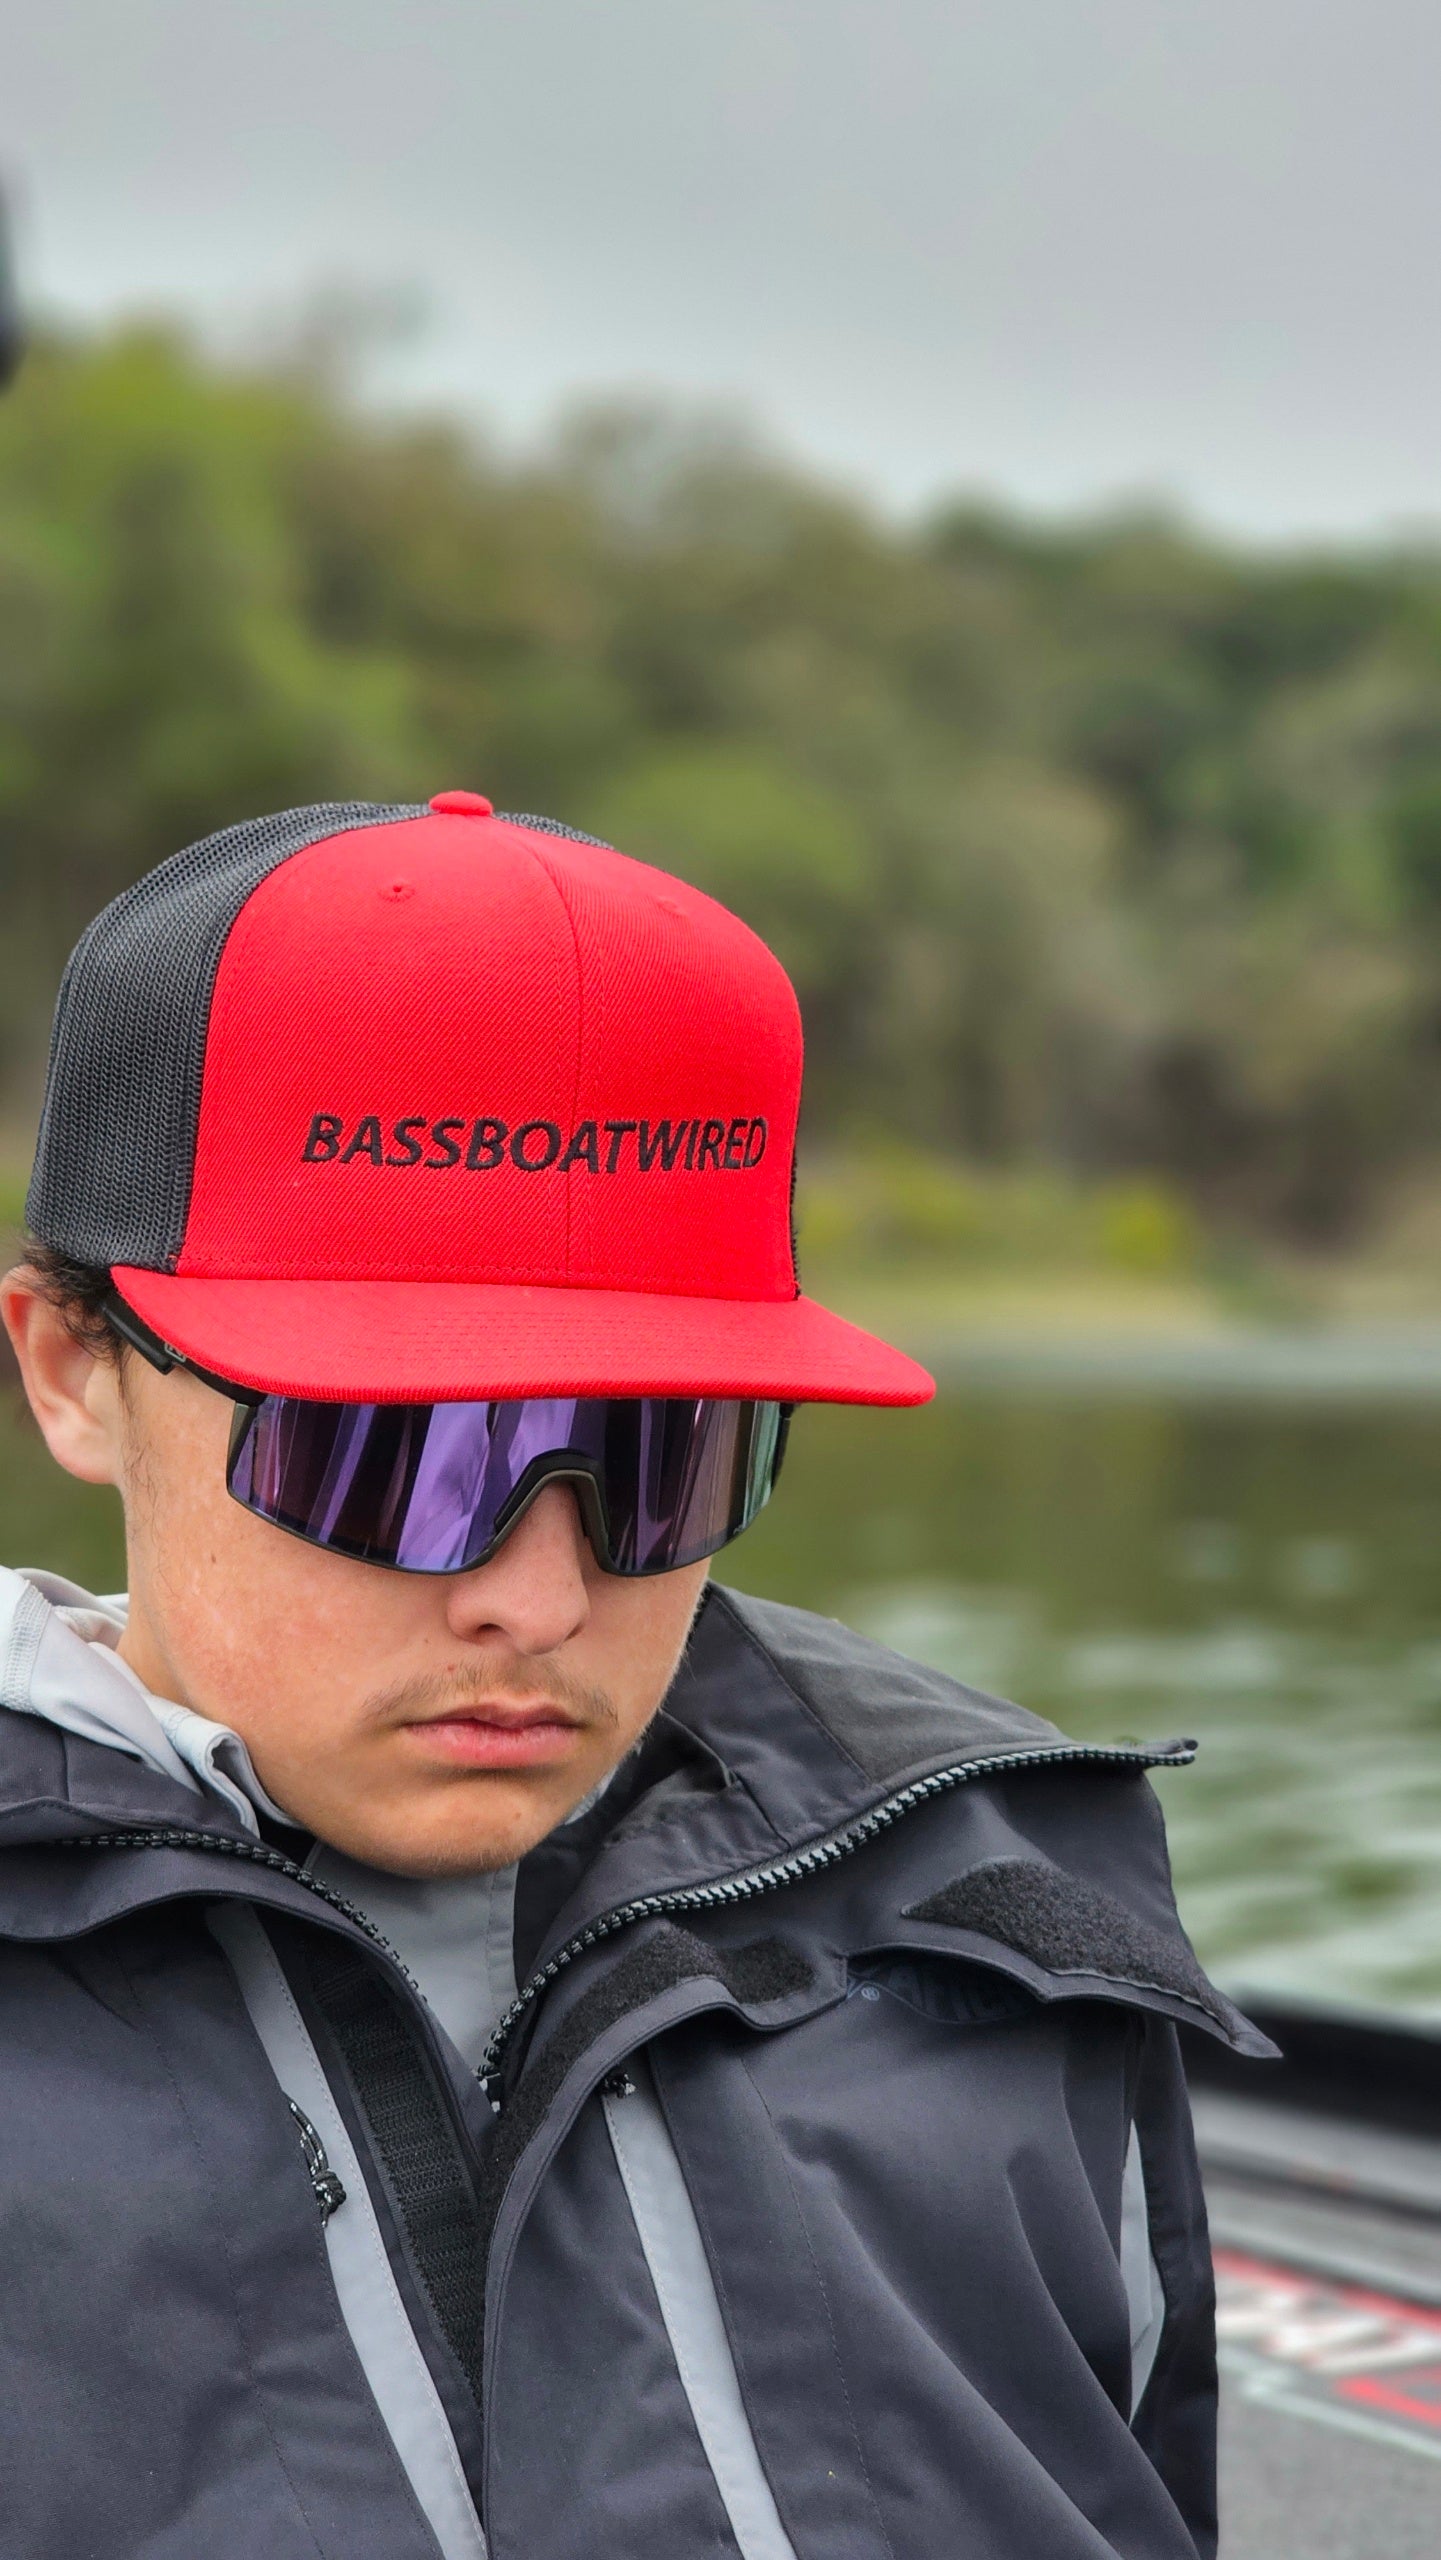 Bass Boat Wired Hats